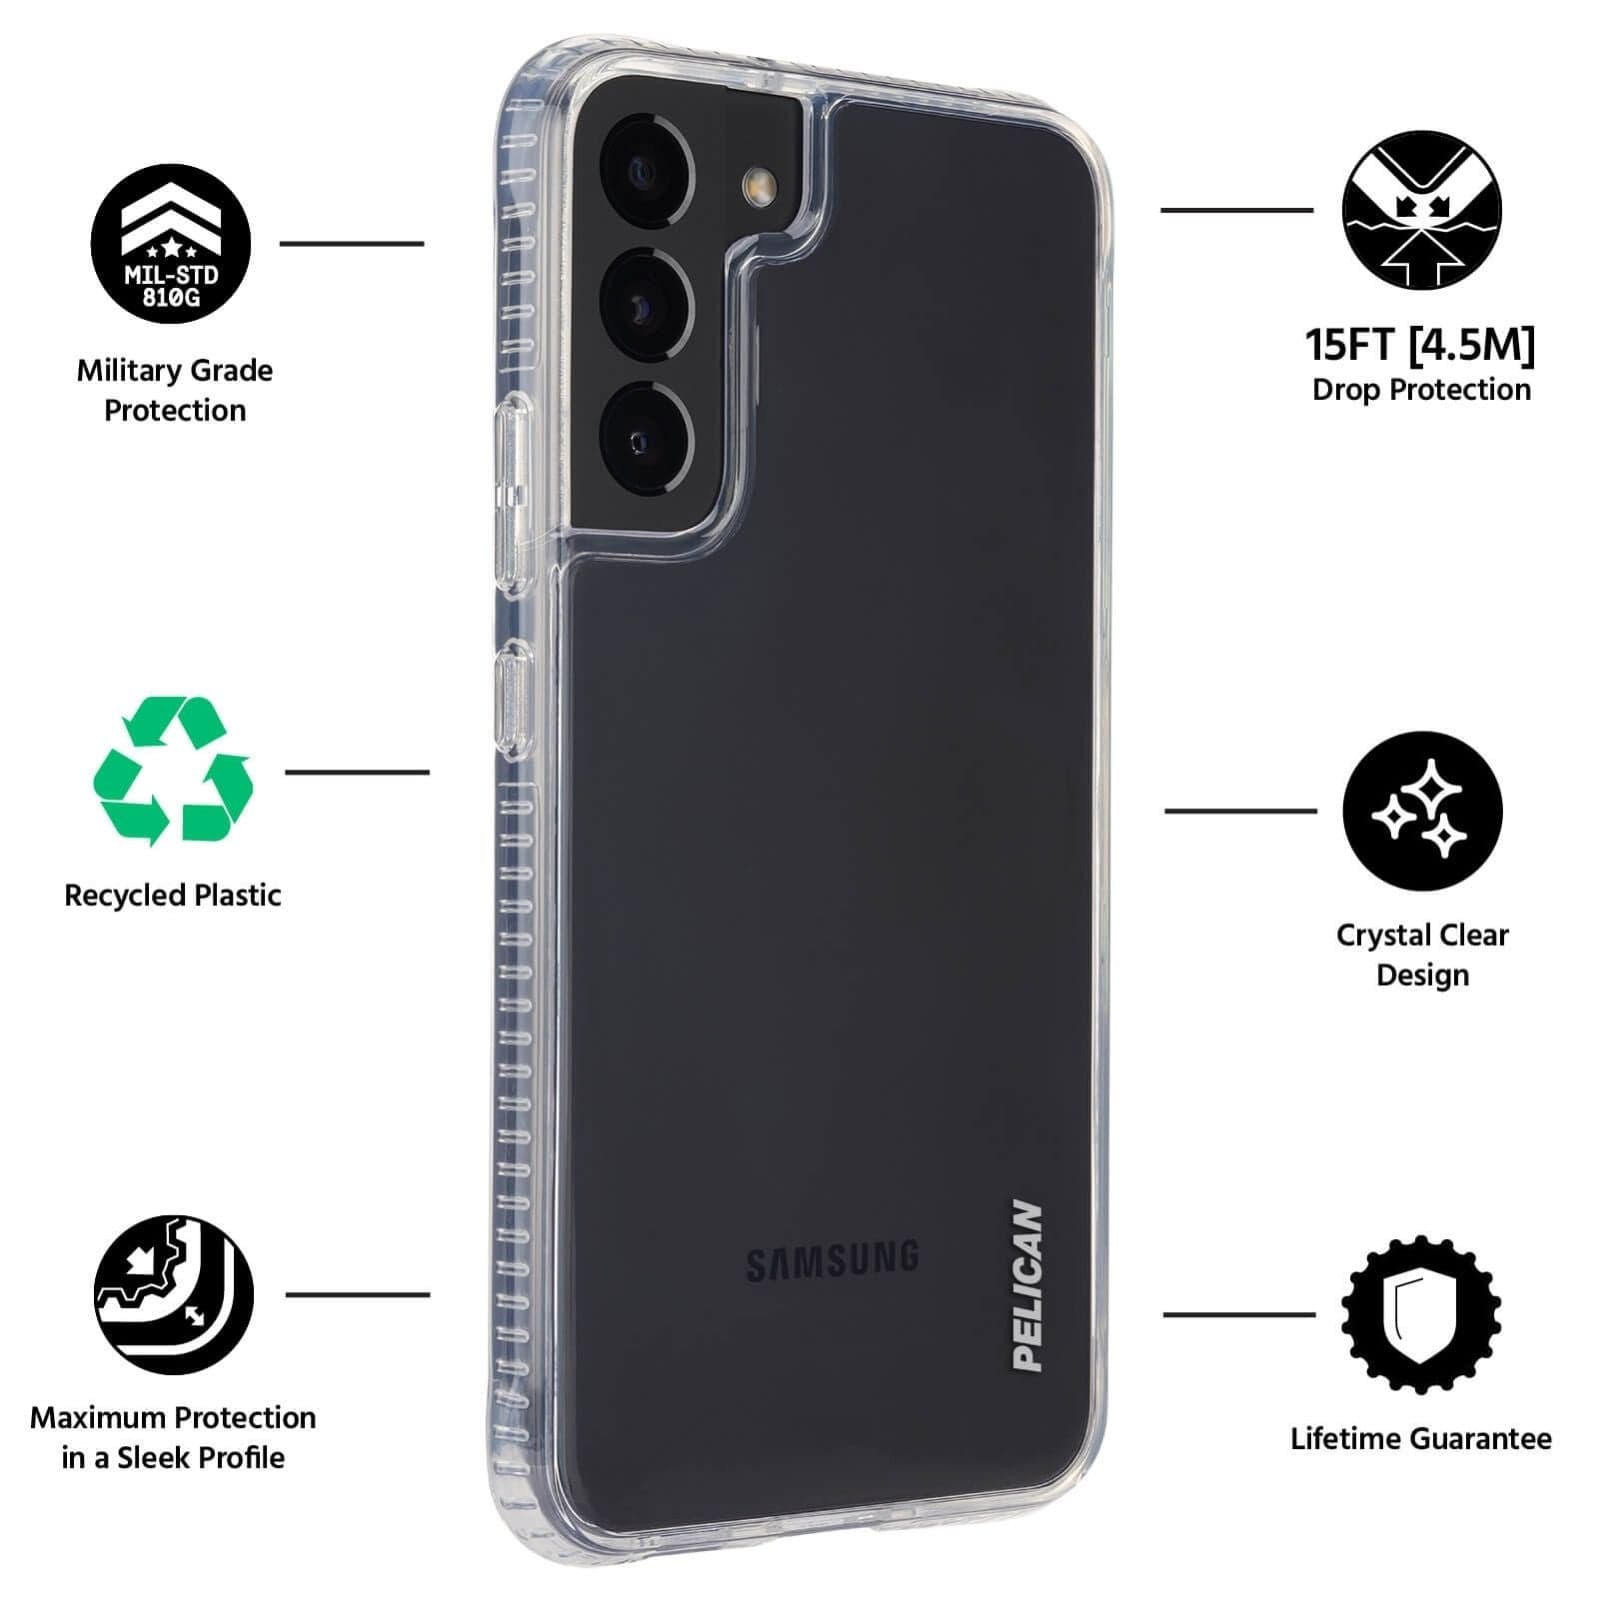 FEATURES: MILITARY GRADE PROTECTION, RECYCLED PLASTIC, MAXIMUM PROTECTION IN A SLEEK PROFILE, 15FT DROP PROTECTION, CRYSTAL CLEAR DESIGN, LIFETIME GUARANTEE. COLOR::CLEAR